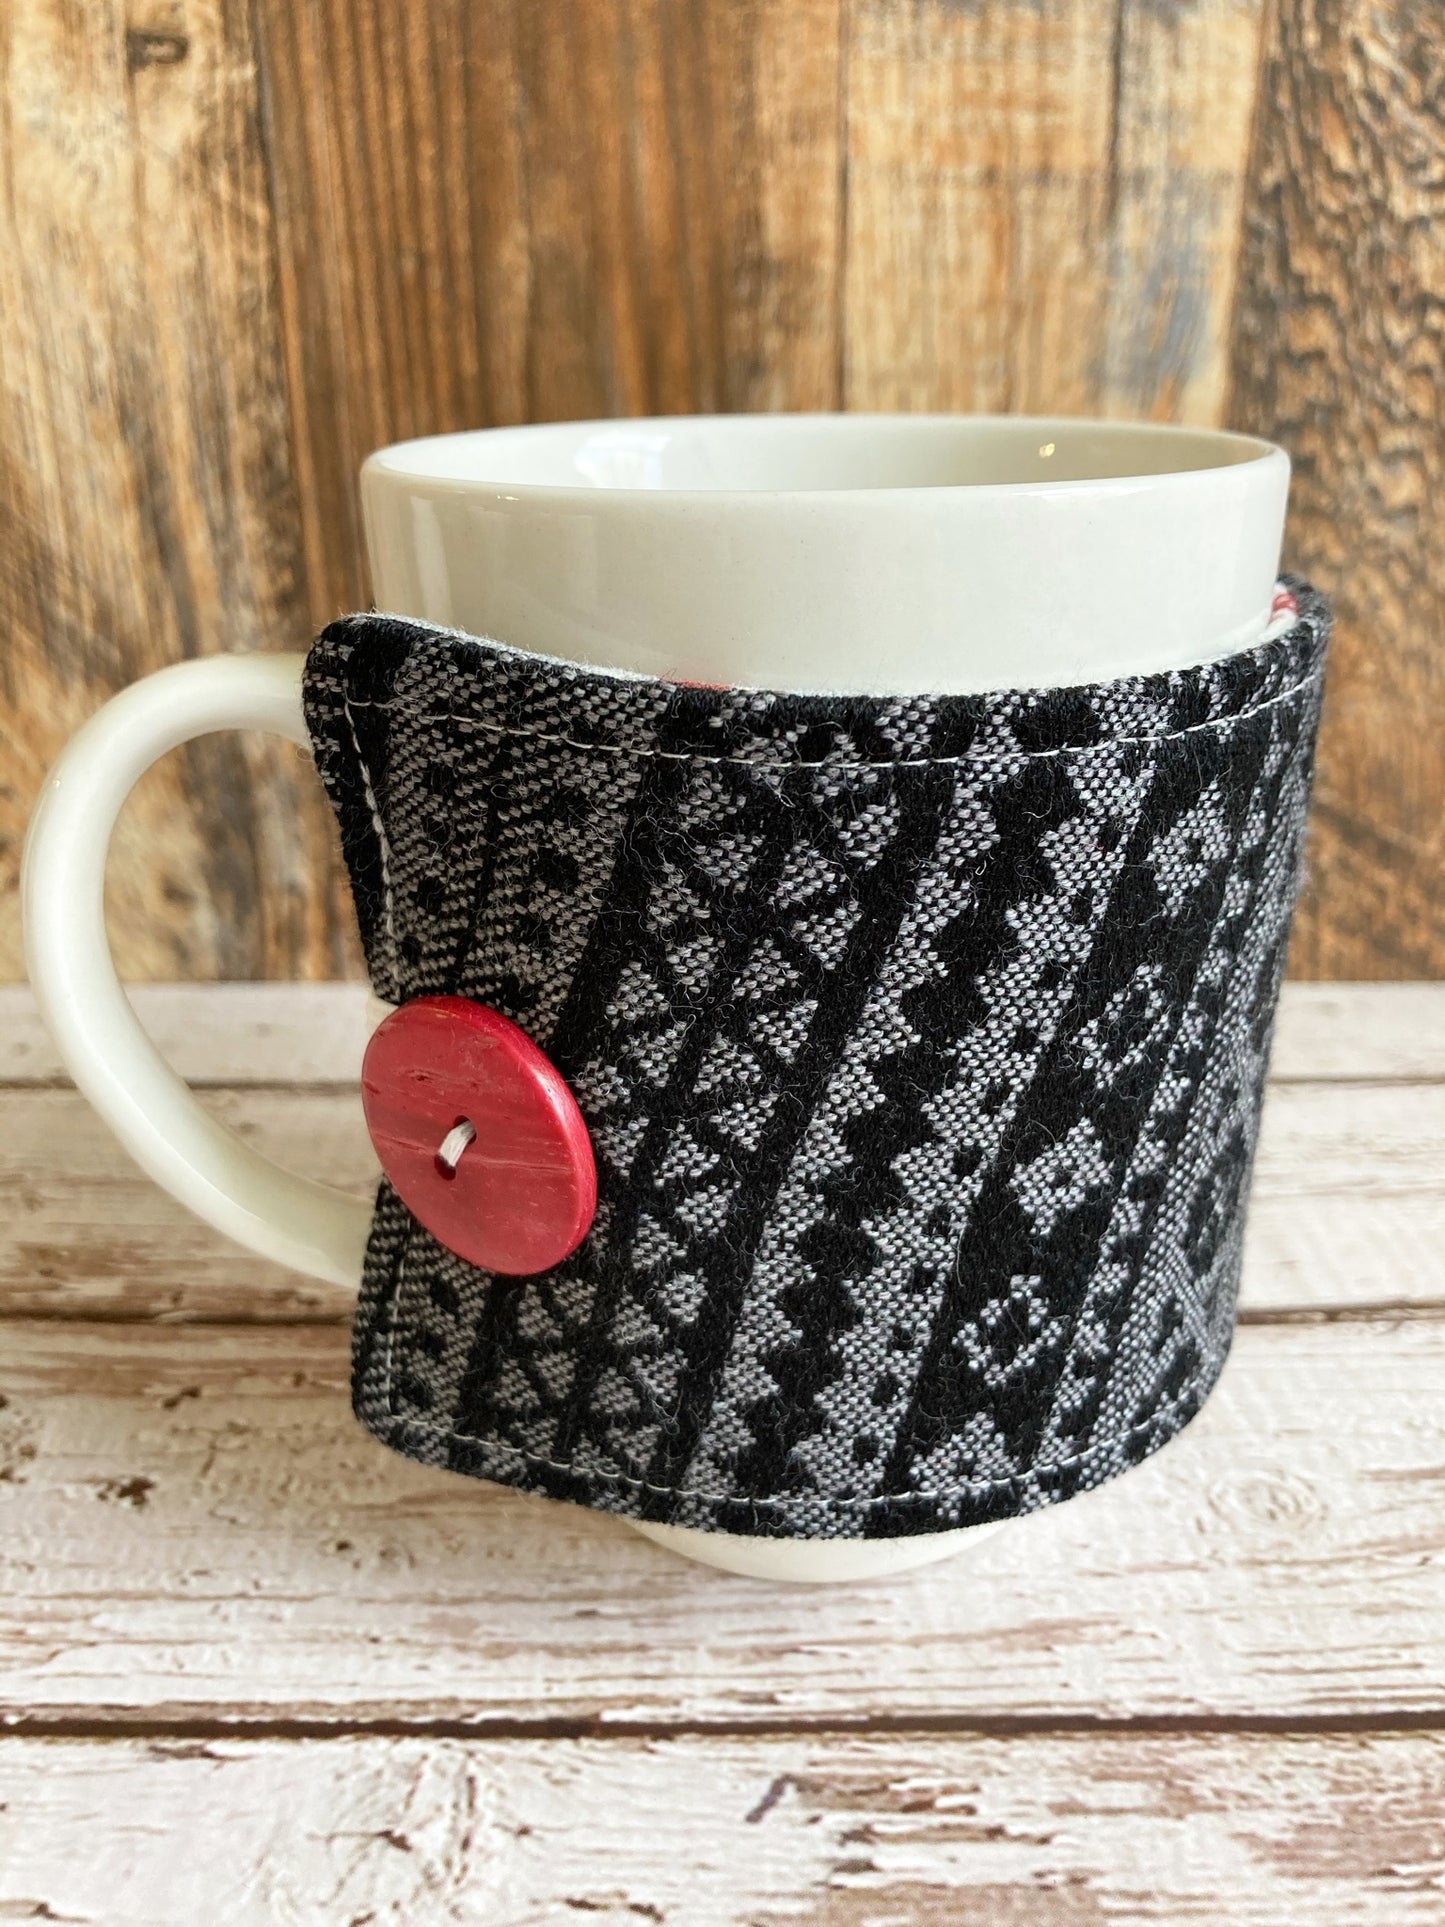 North Woods Holiday Reversible Mug and Cup Cozy (also fits pints of ice cream)